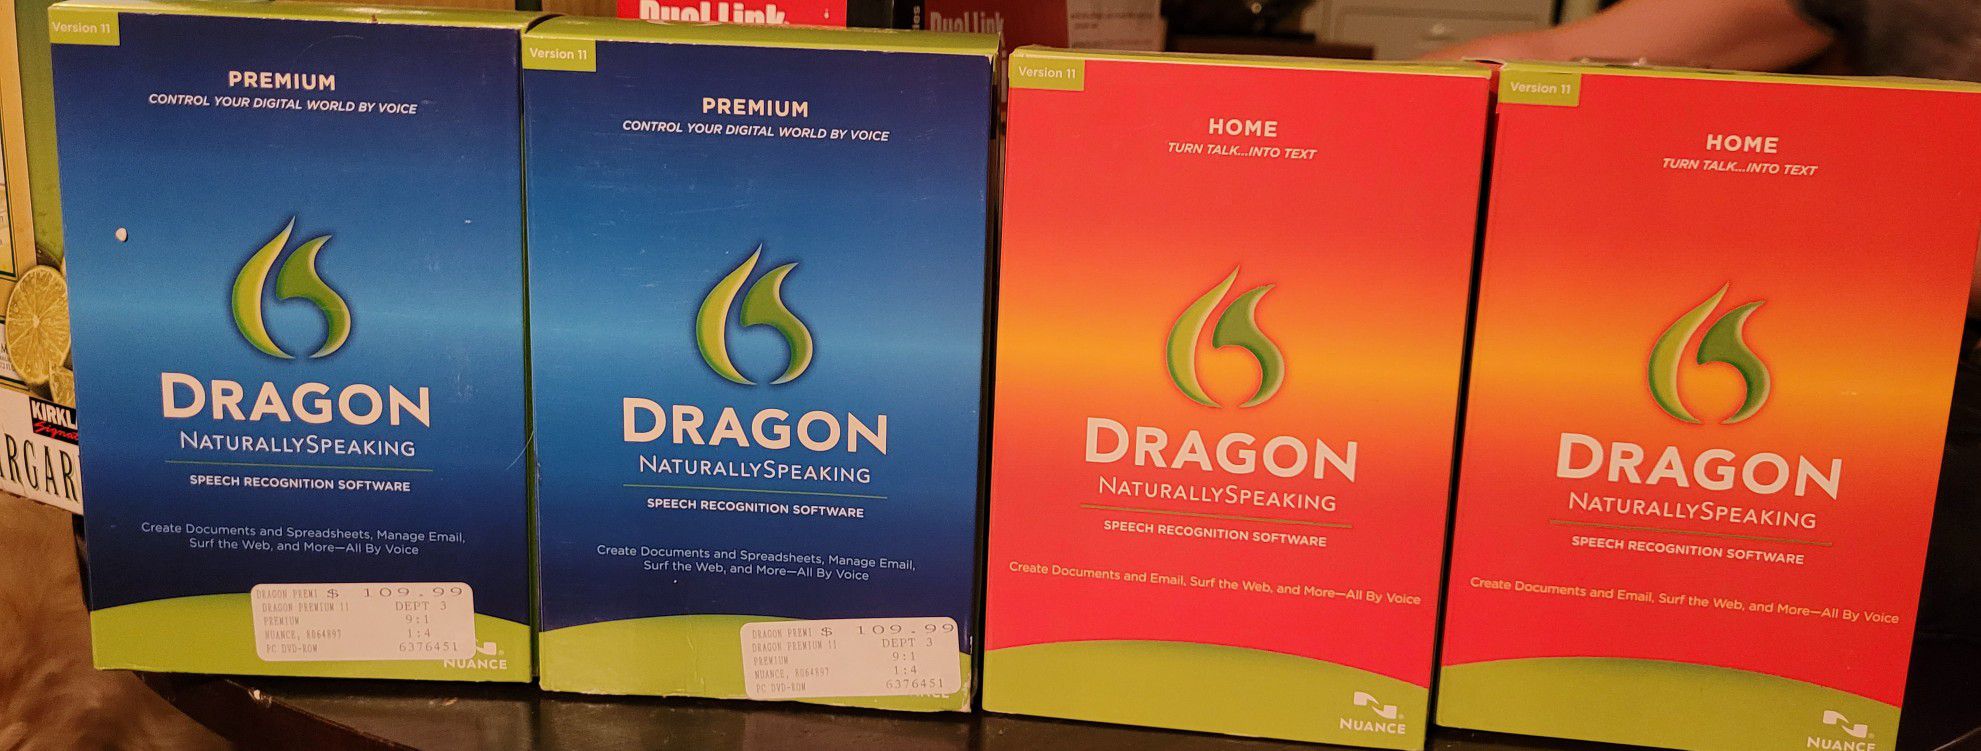 Dragon Naturally Speaking Premium or Home Editions